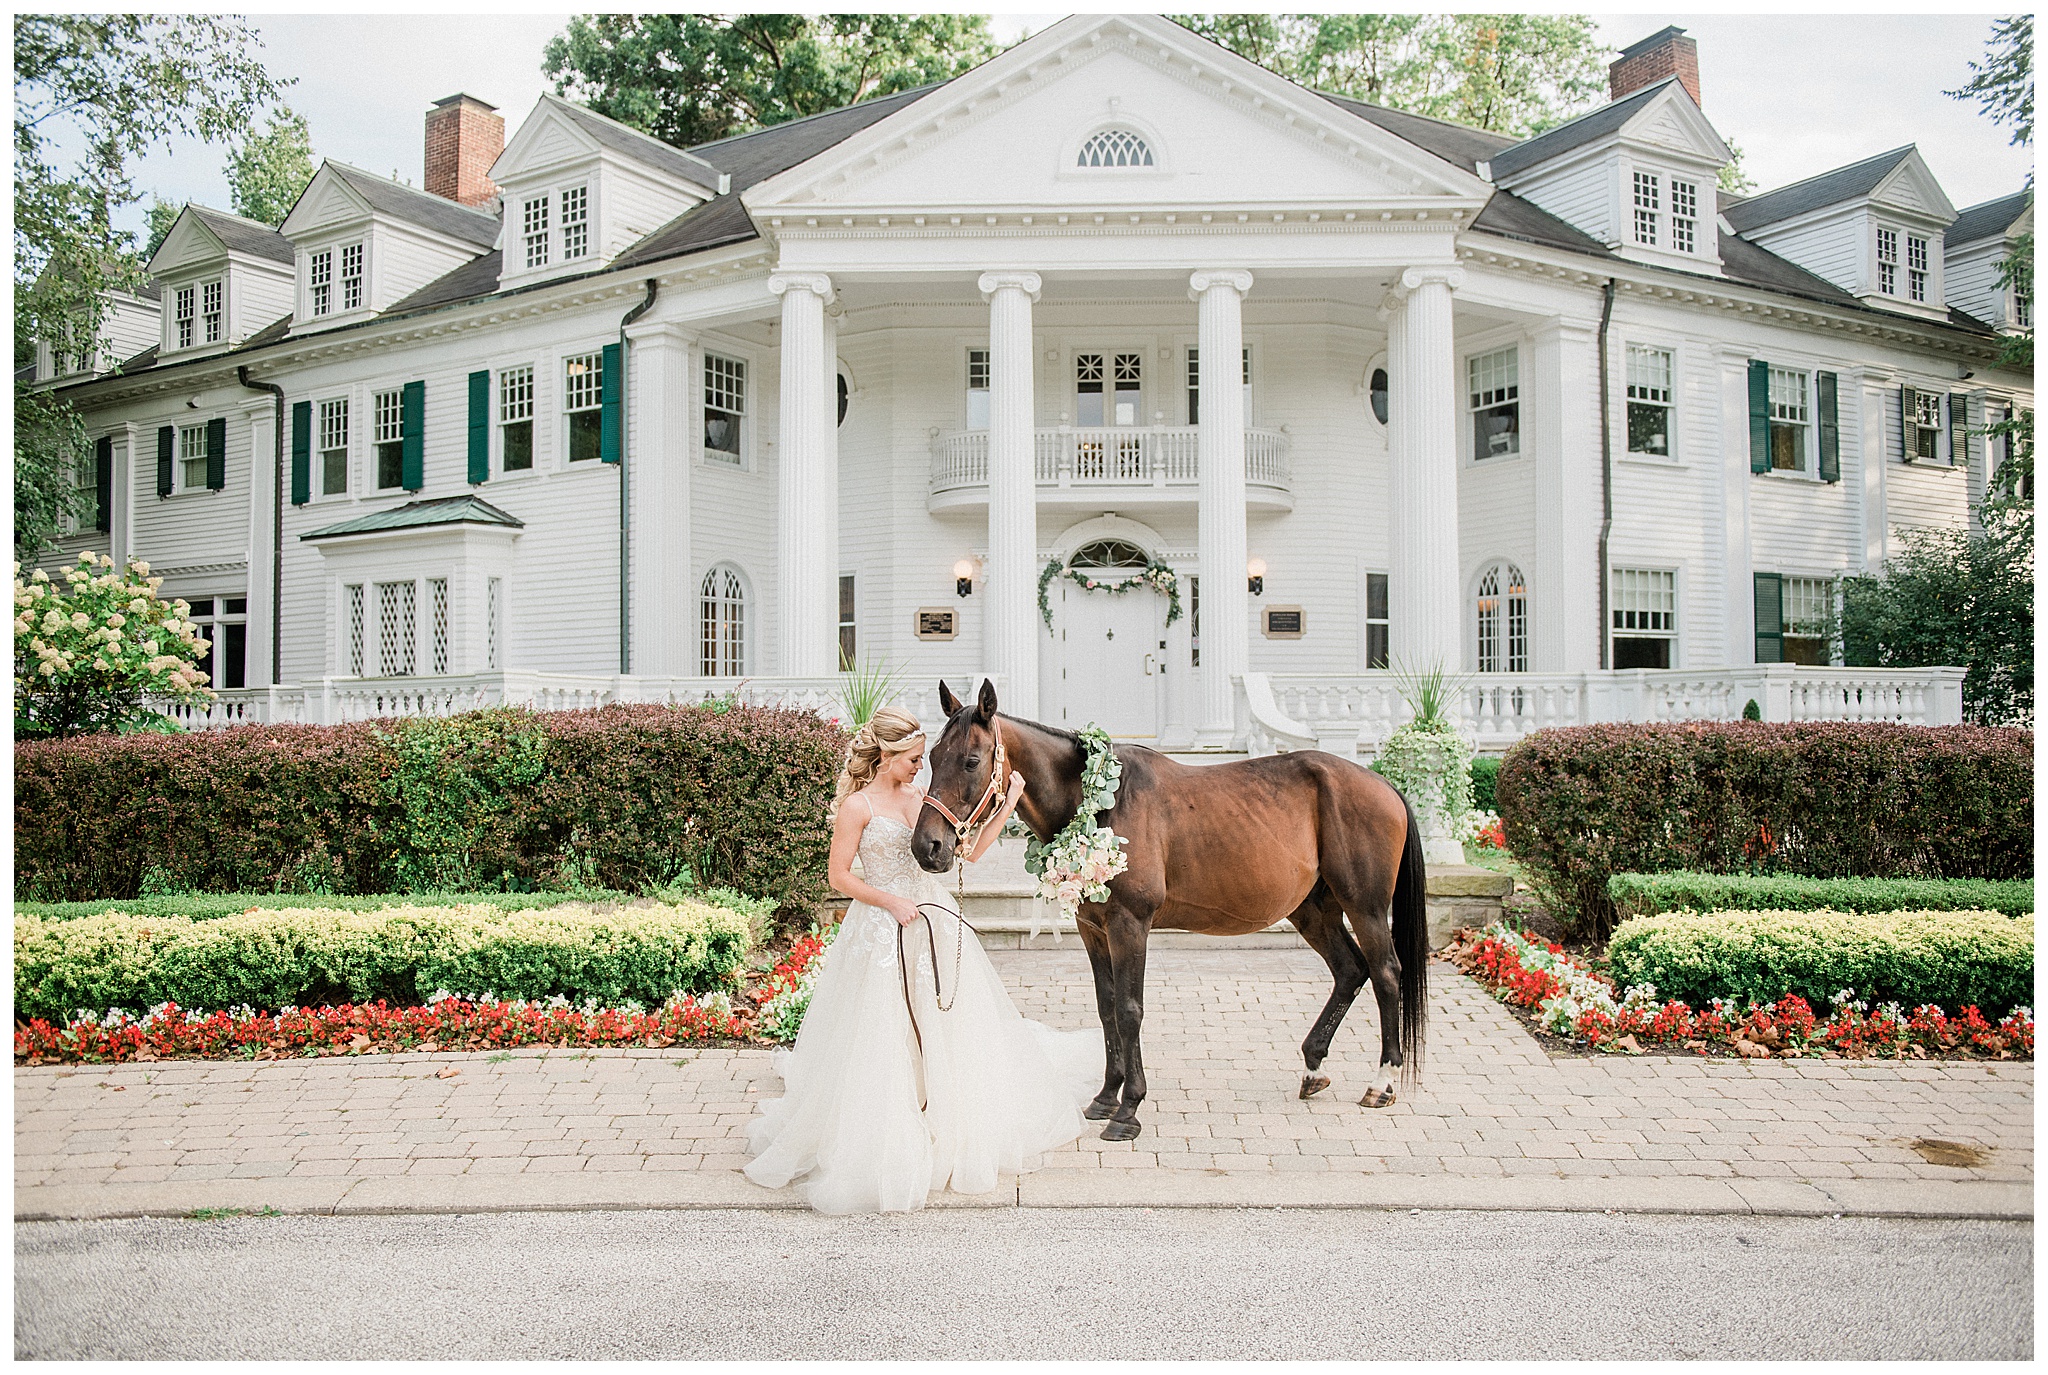 Bride with Horse